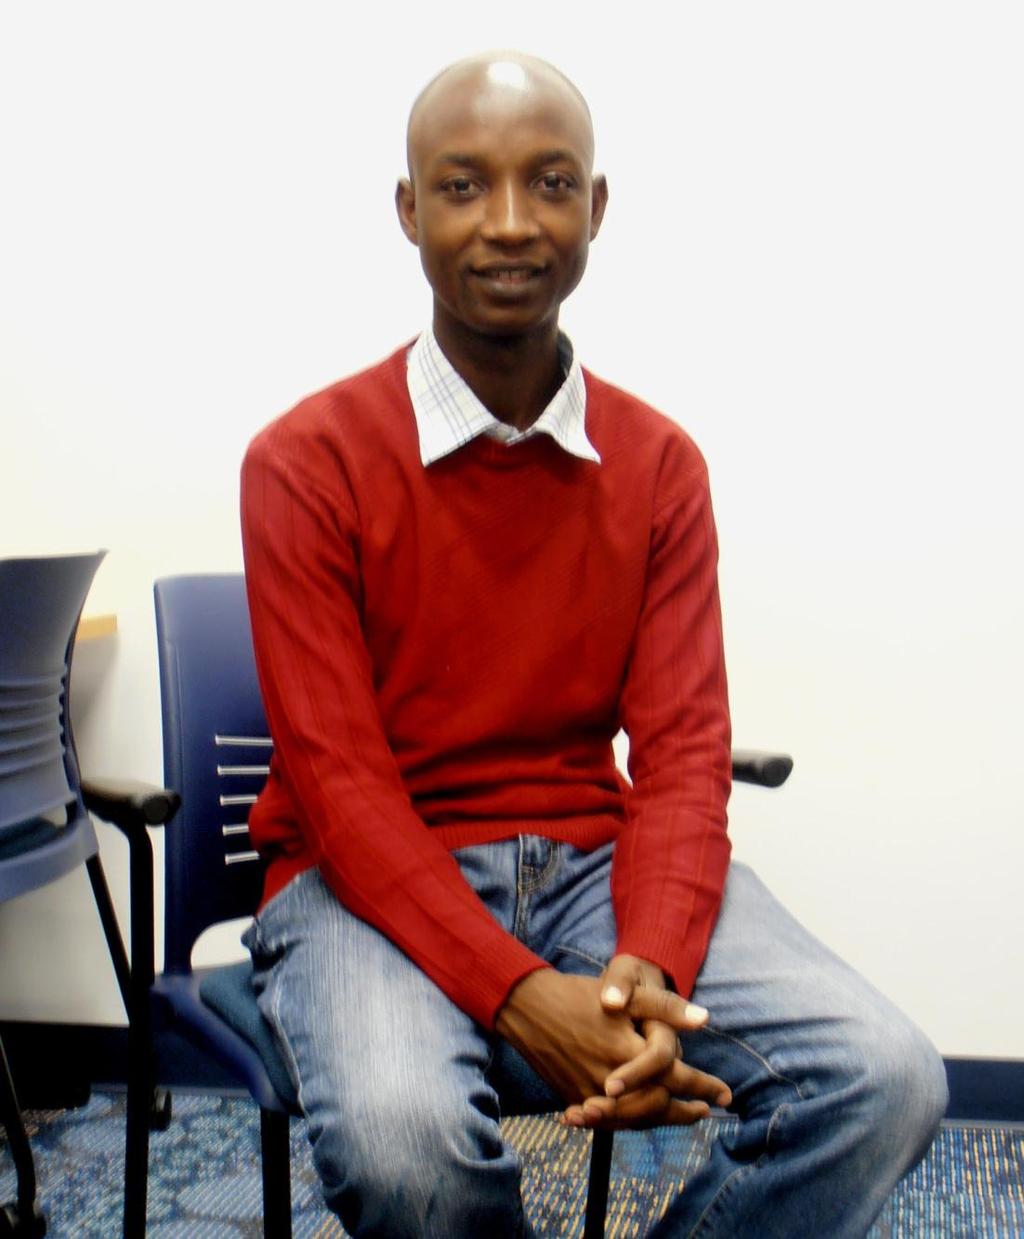 Upcoming Events: The African & African Diaspora Studies Program (AADS) is delighted to share the news that Fiacre Bienvenu will be graduating next week with a Master of Arts Degree in AADS.